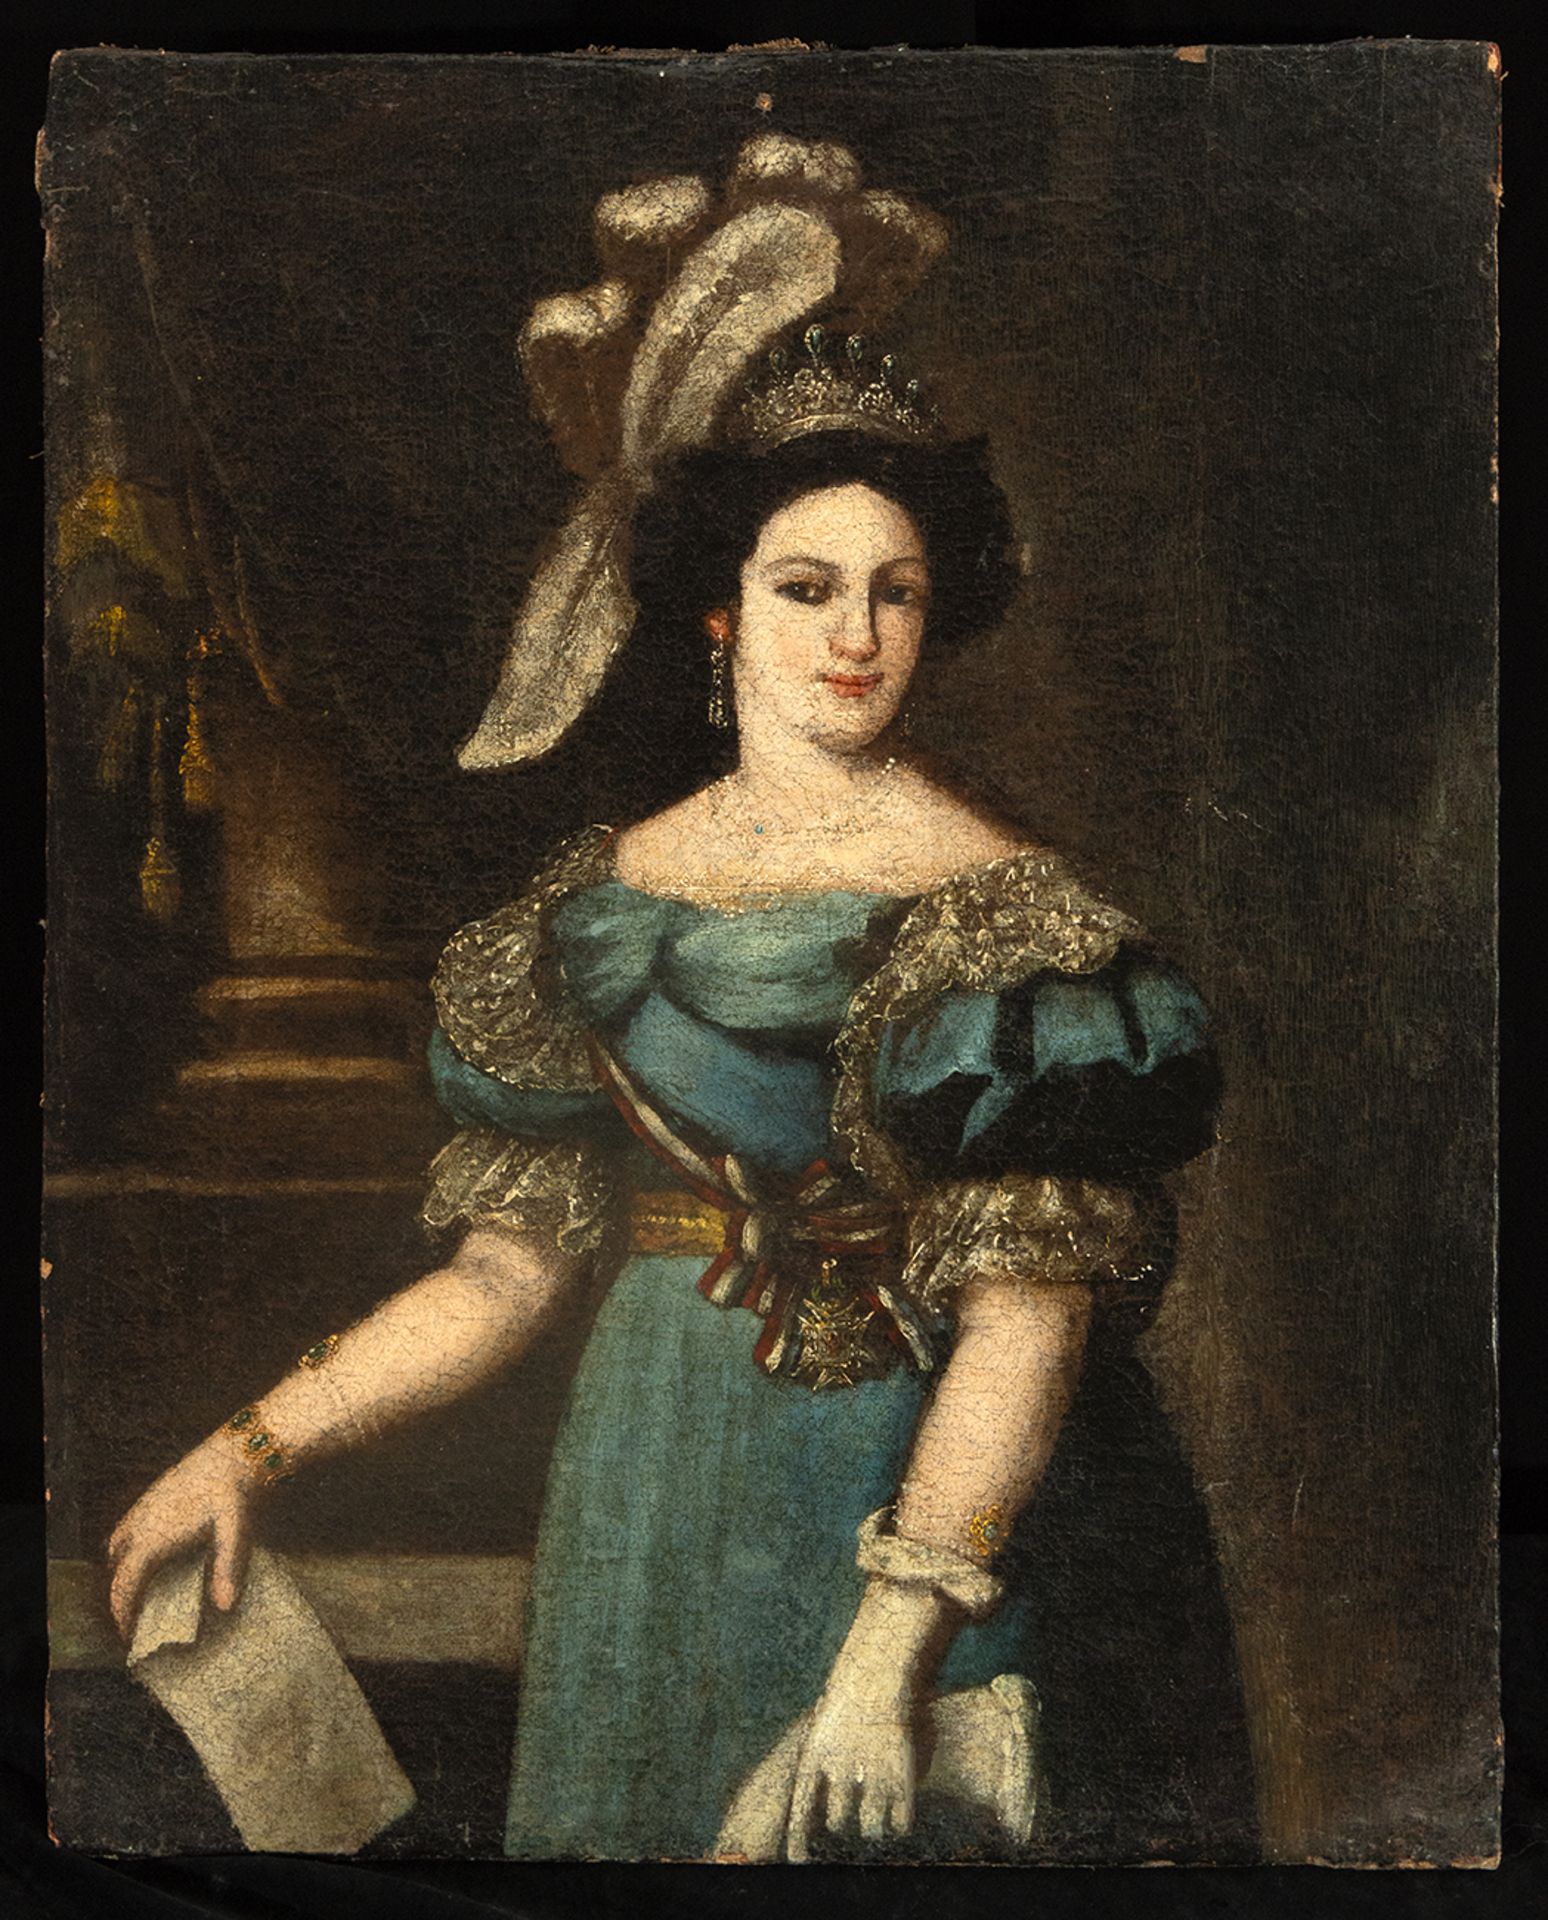 Latin American colonial school of the late 18th century, "Portrait of a Lady"